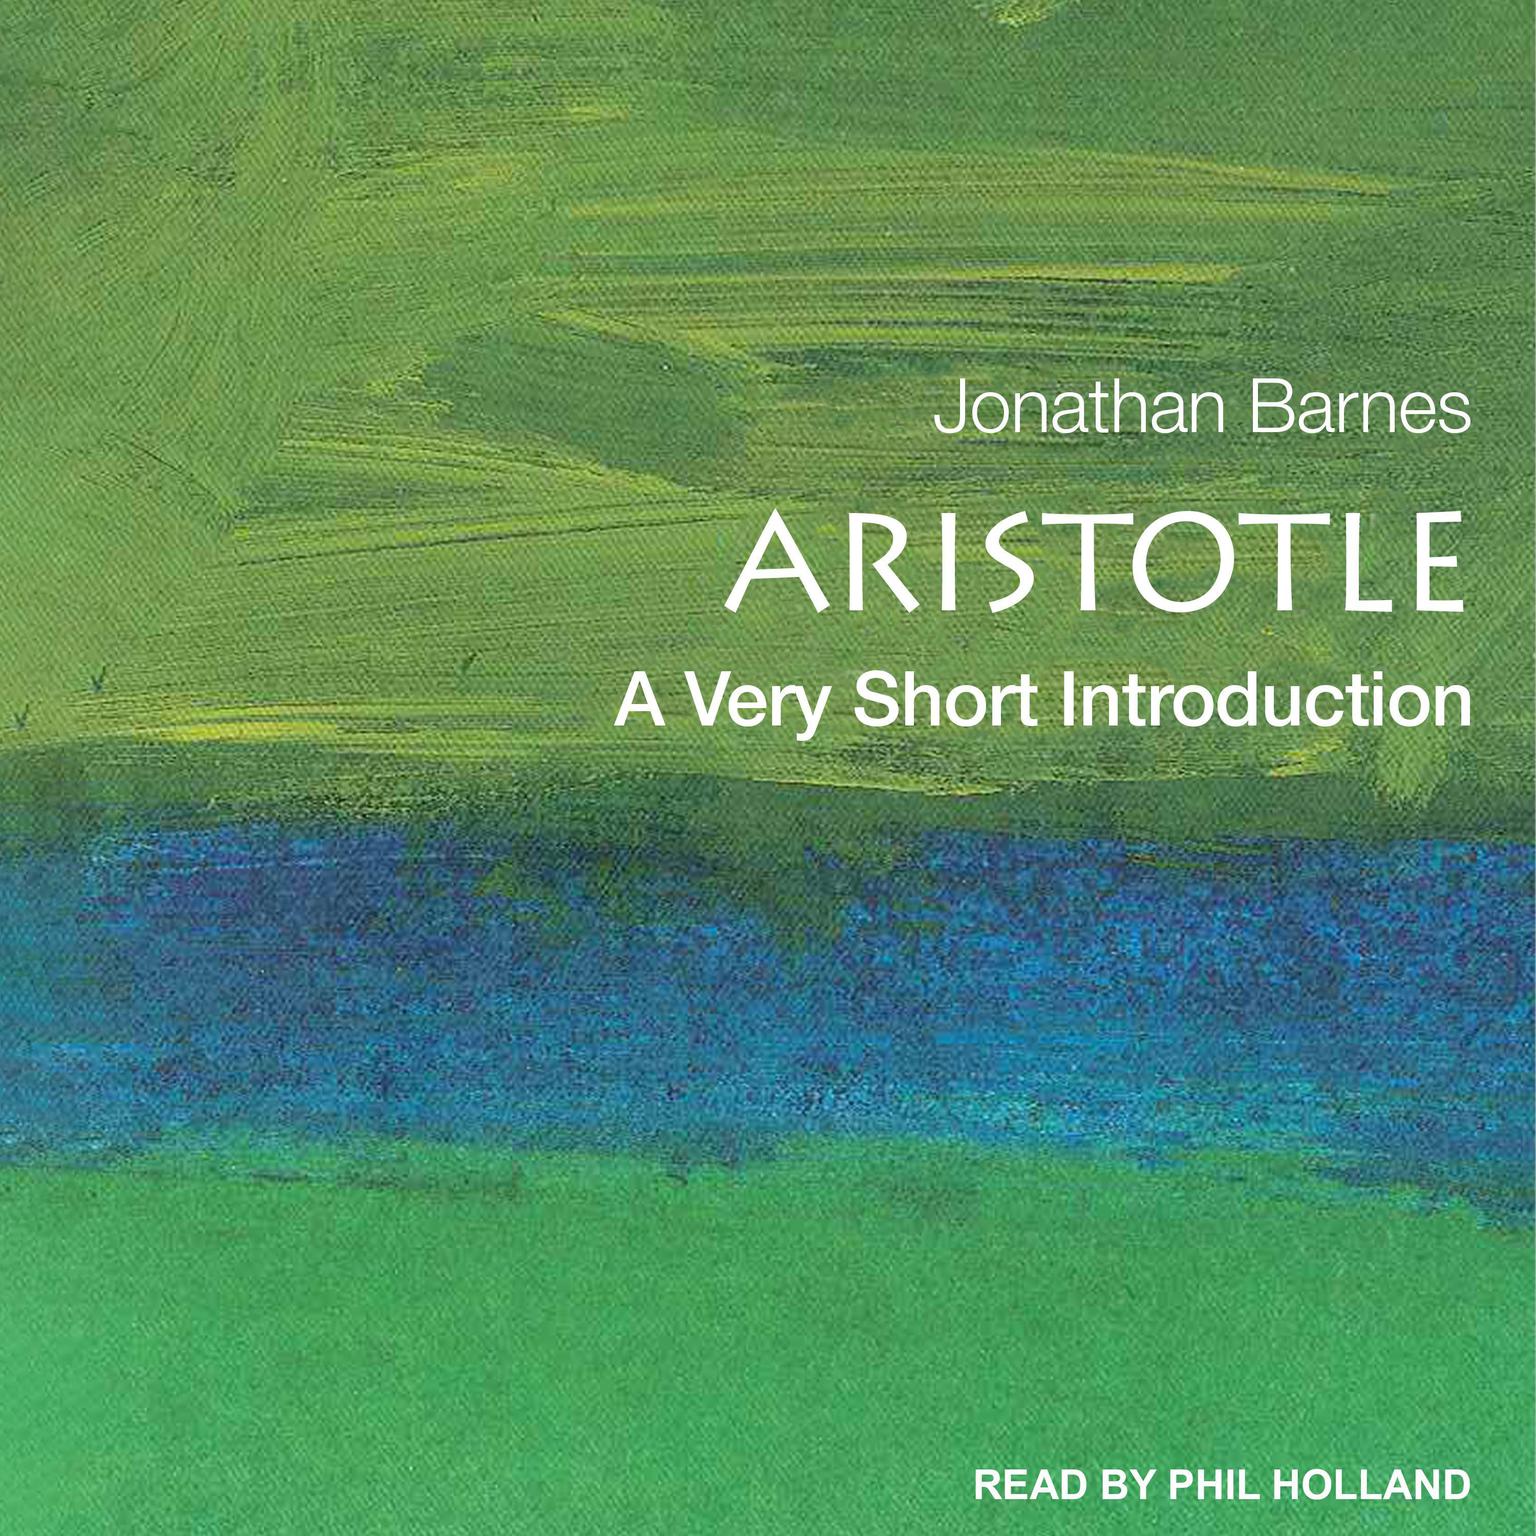 Aristotle: A Very Short Introduction Audiobook, by Jonathan Barnes